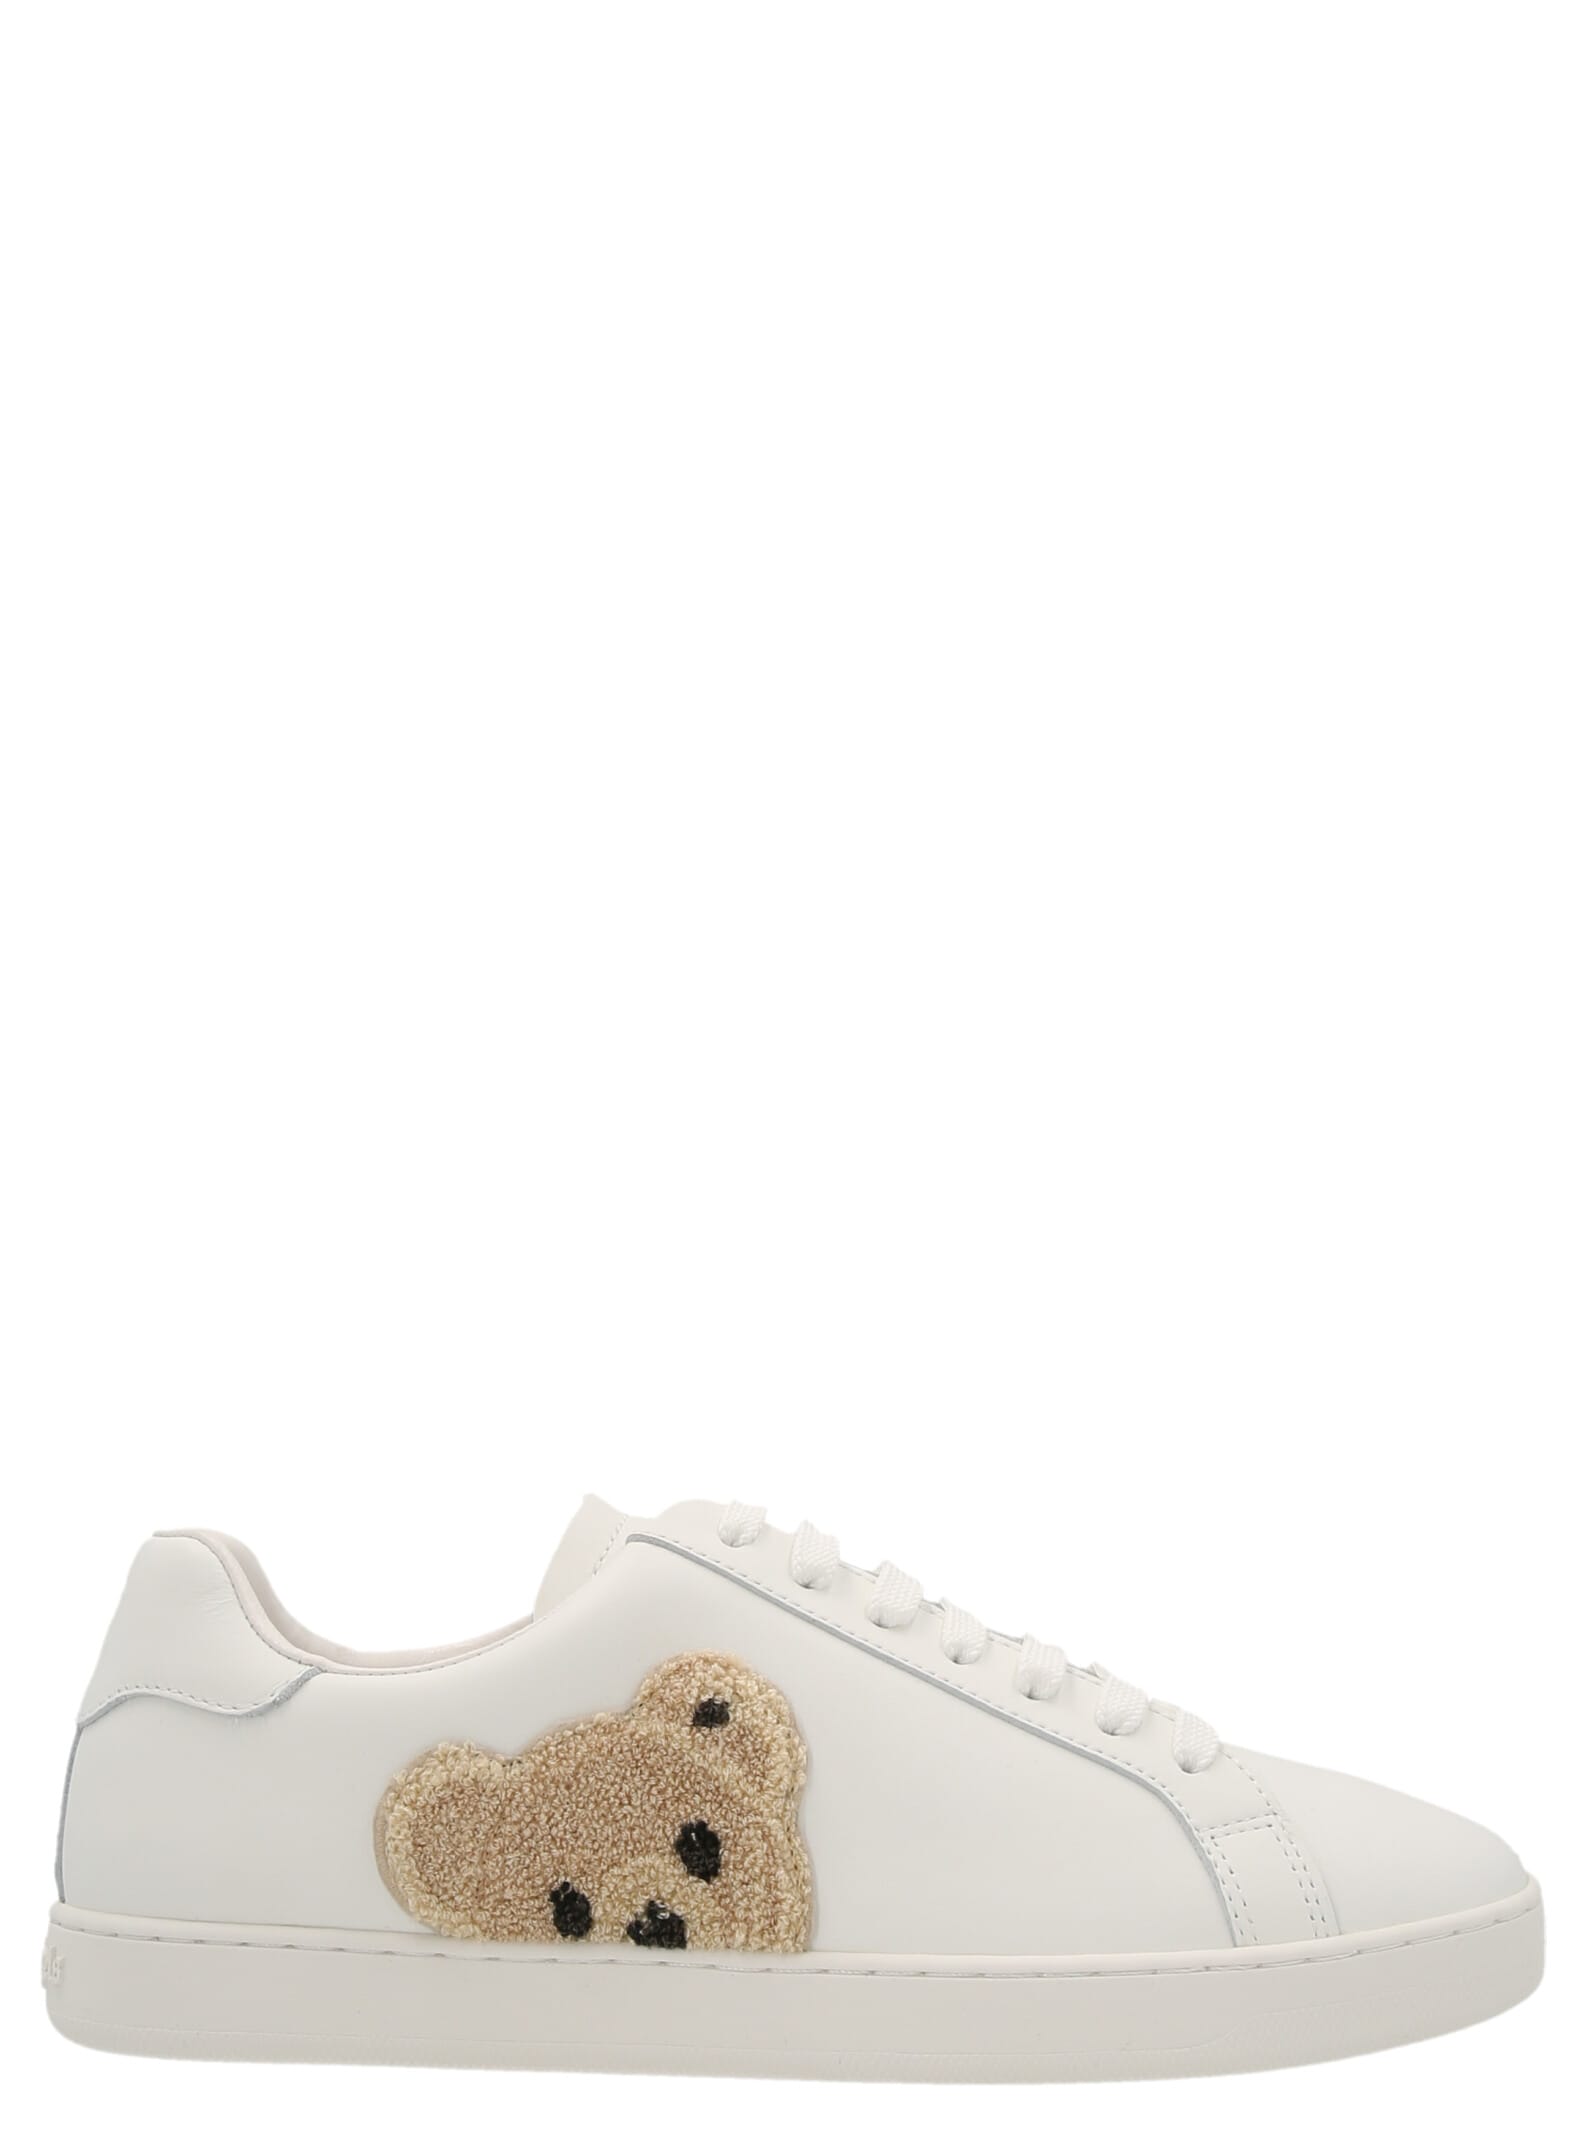 Palm Angels new Teddy Bear Sneakers